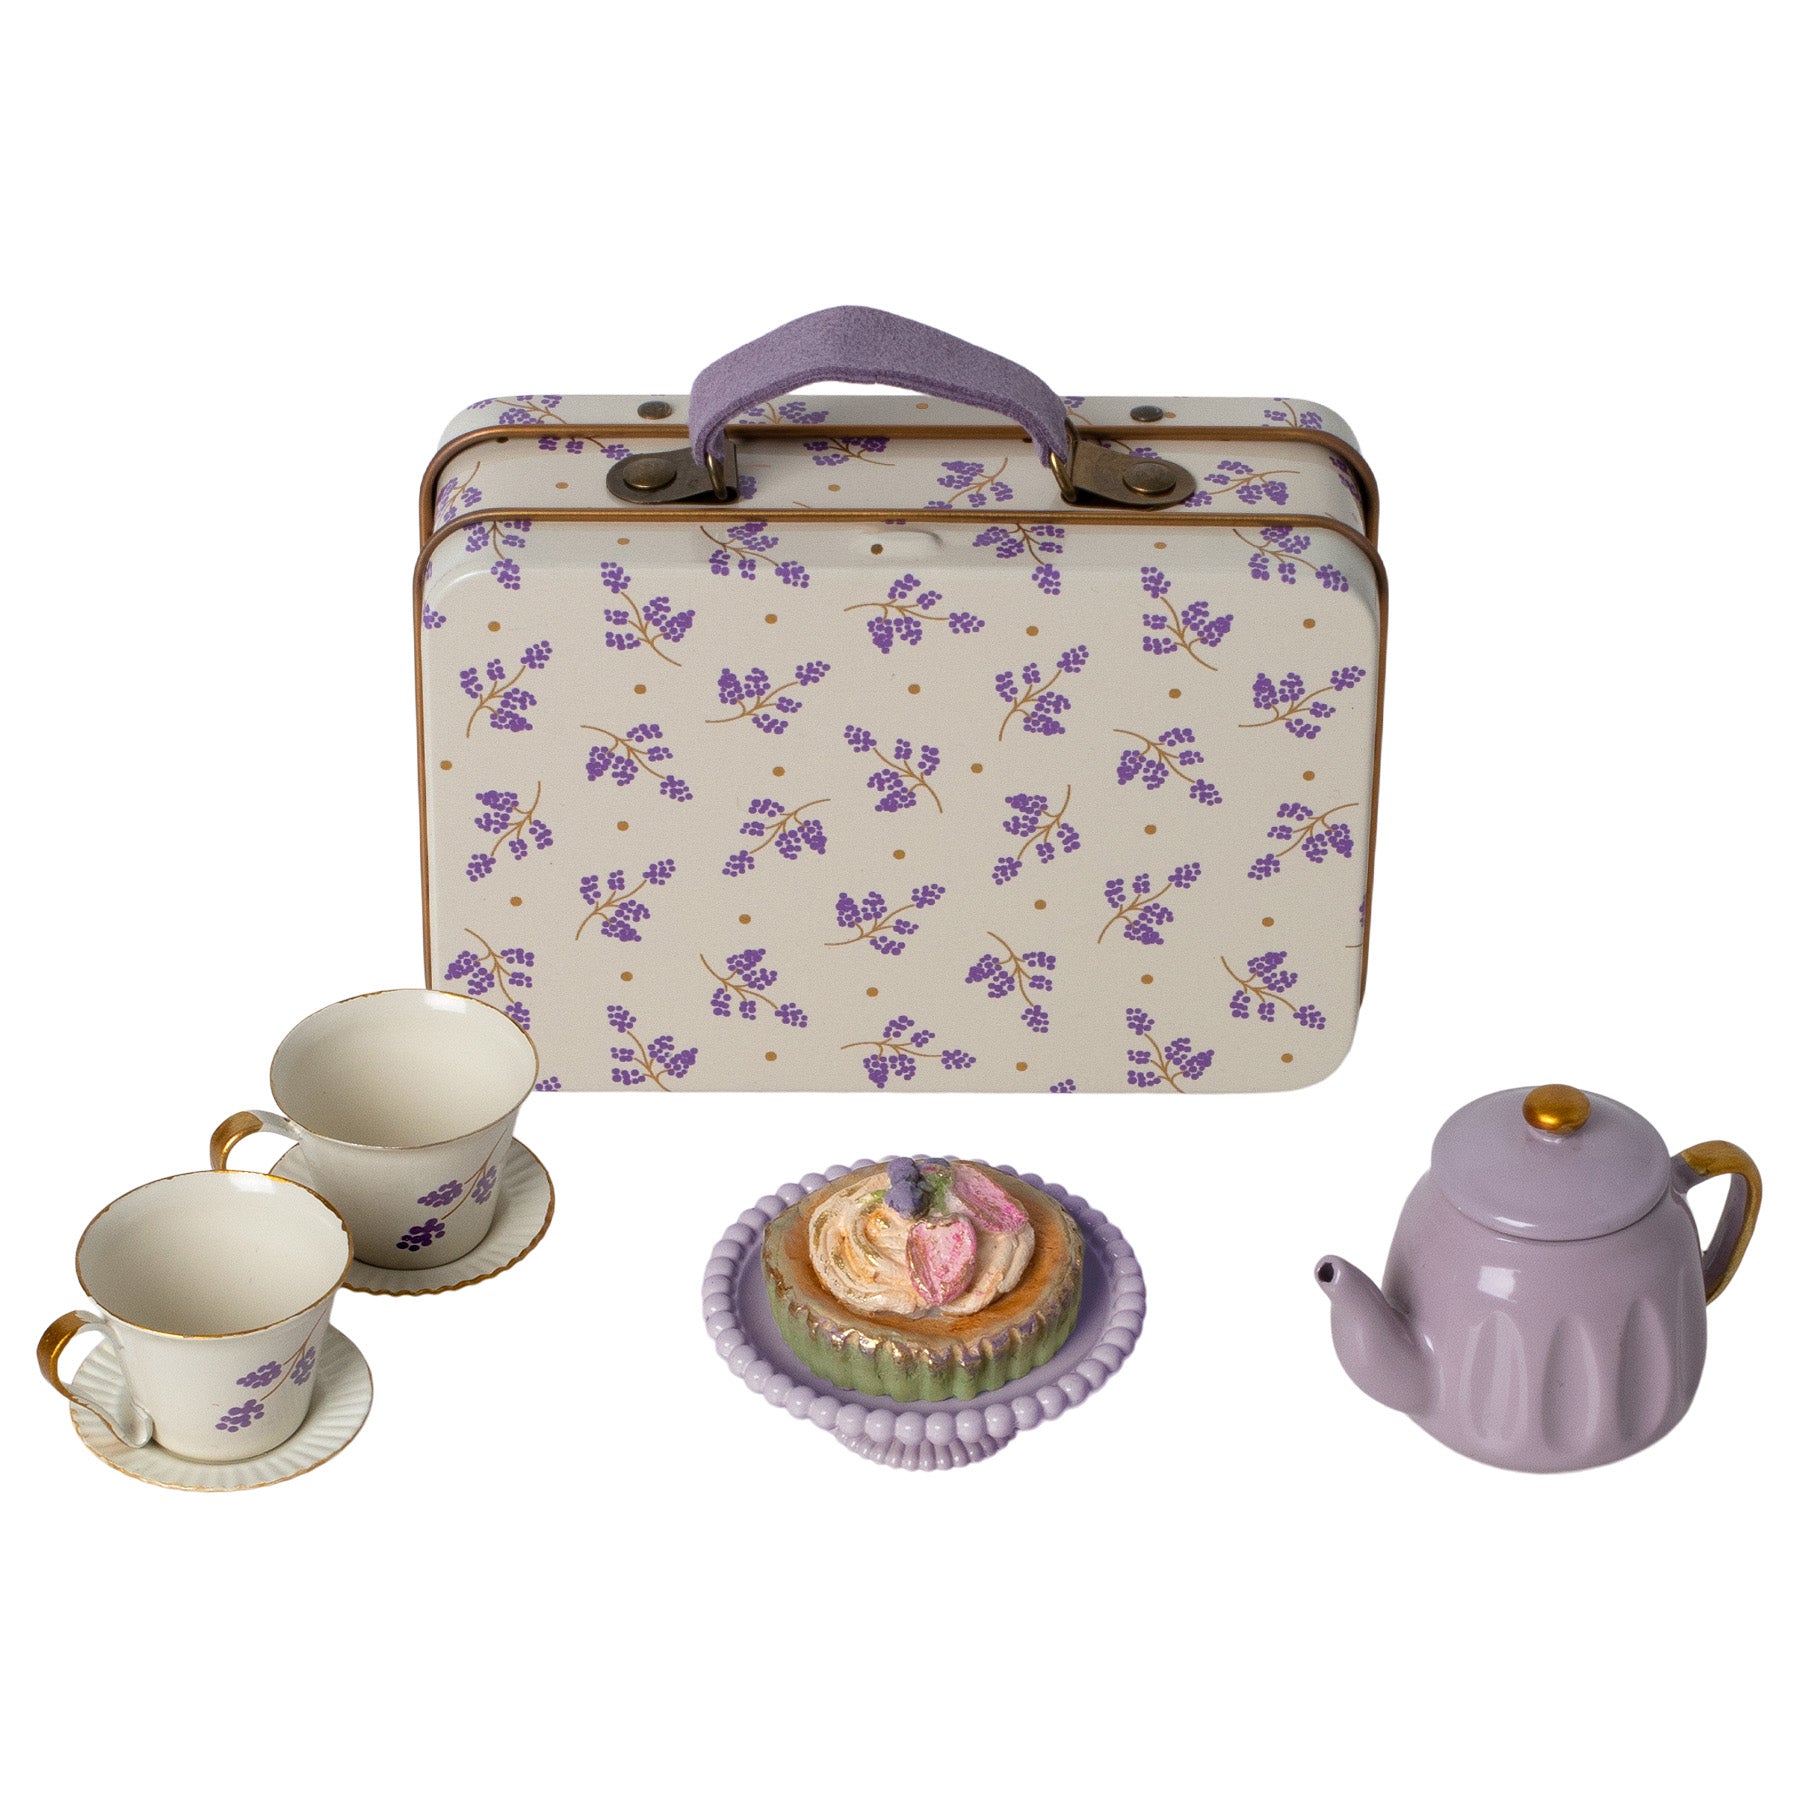 maileg miniature cream suitcase with a purple print, containing a tea set and cakes